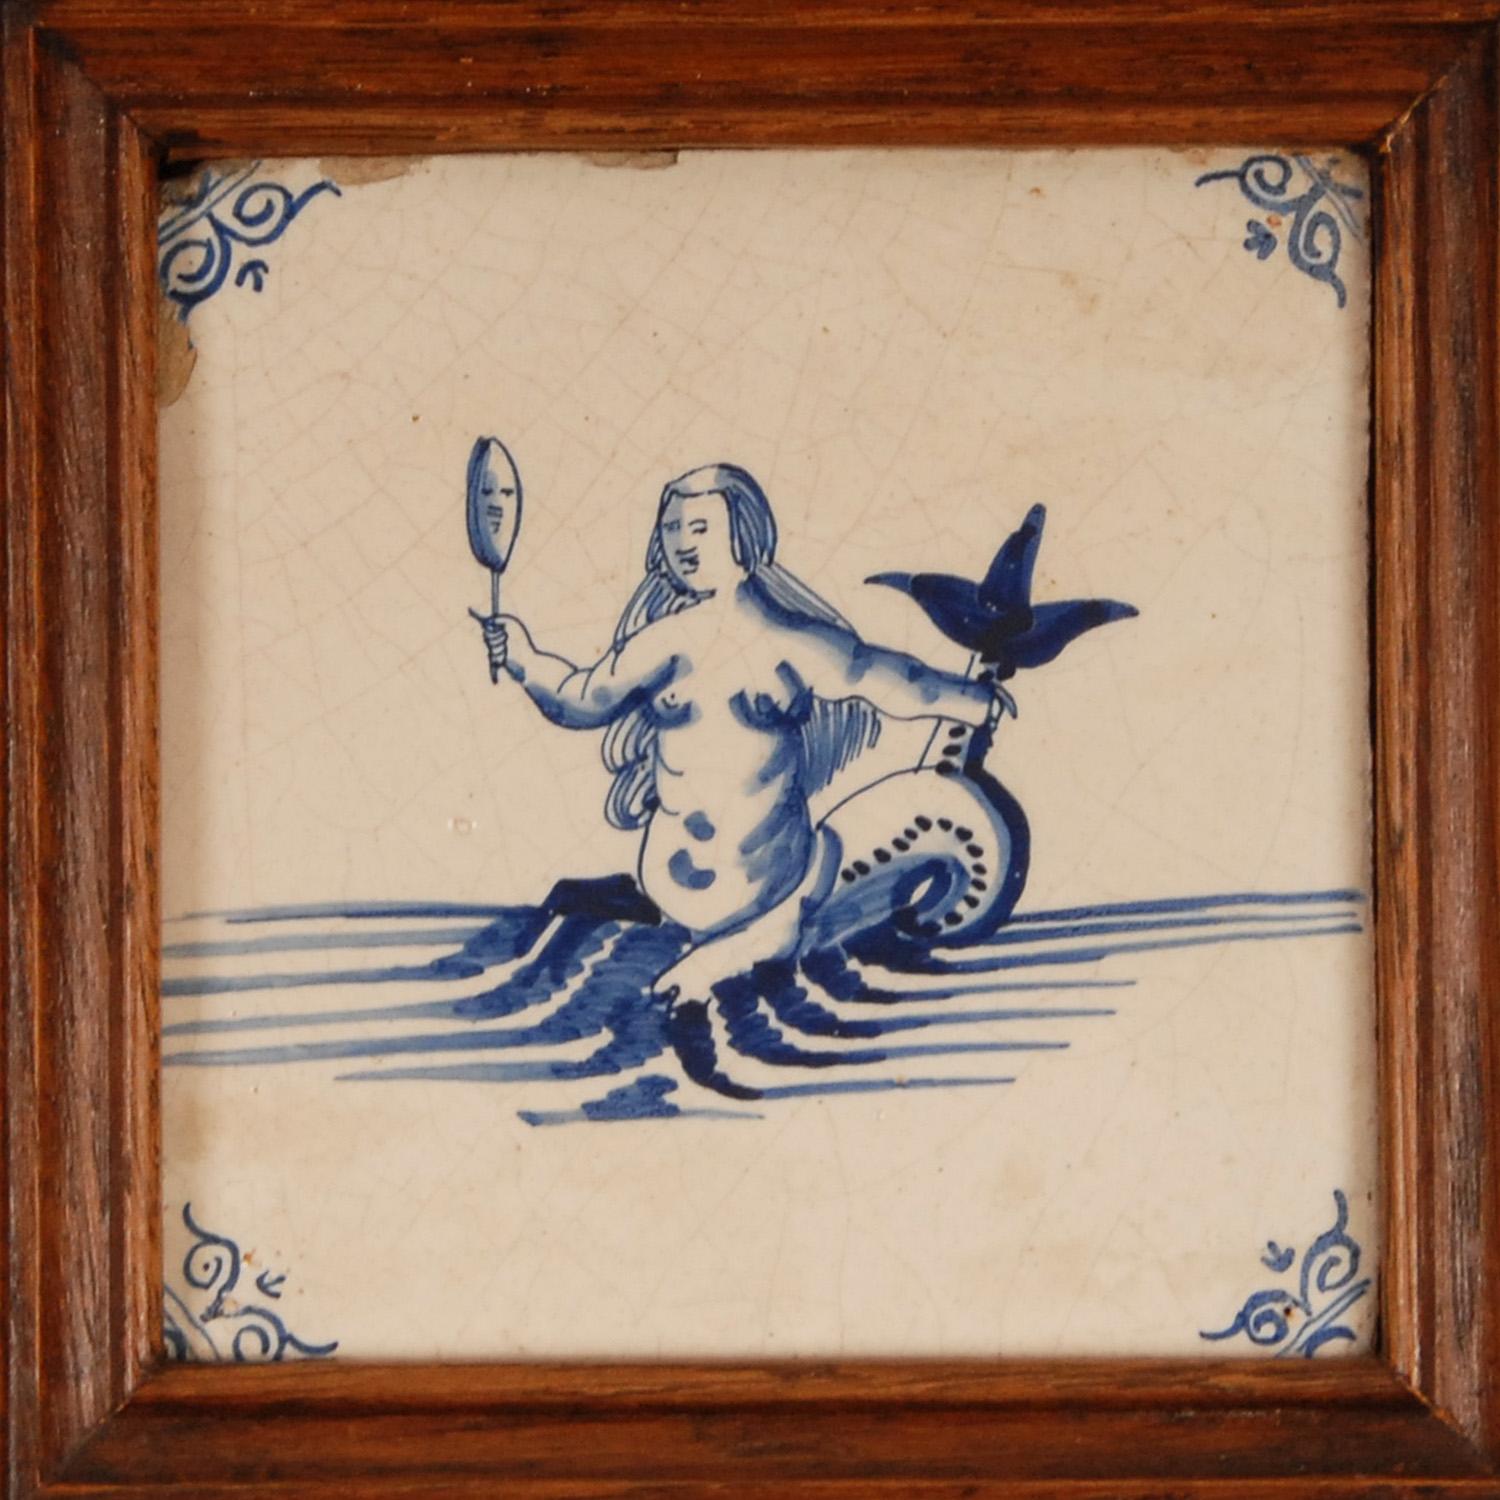 18th Century and Earlier 18th Century Delft Tiles Oak Framed Blue and White Mermaid Dutch Delftware Tiles For Sale